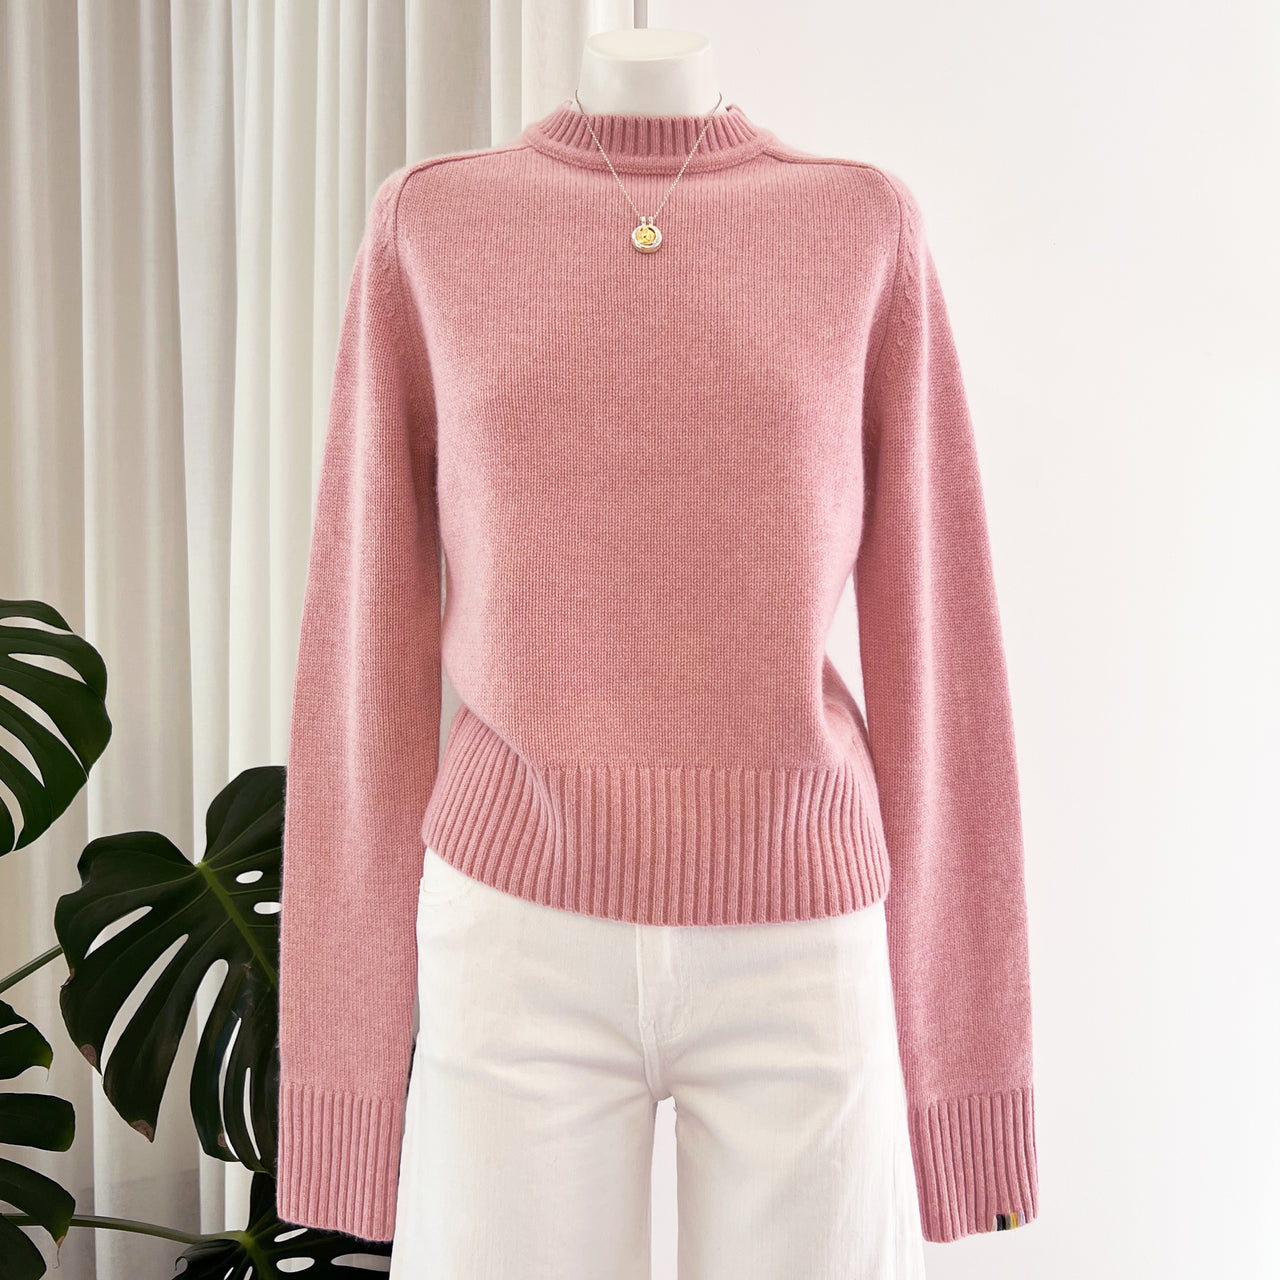 Glory Cashmere Sweater in Terry